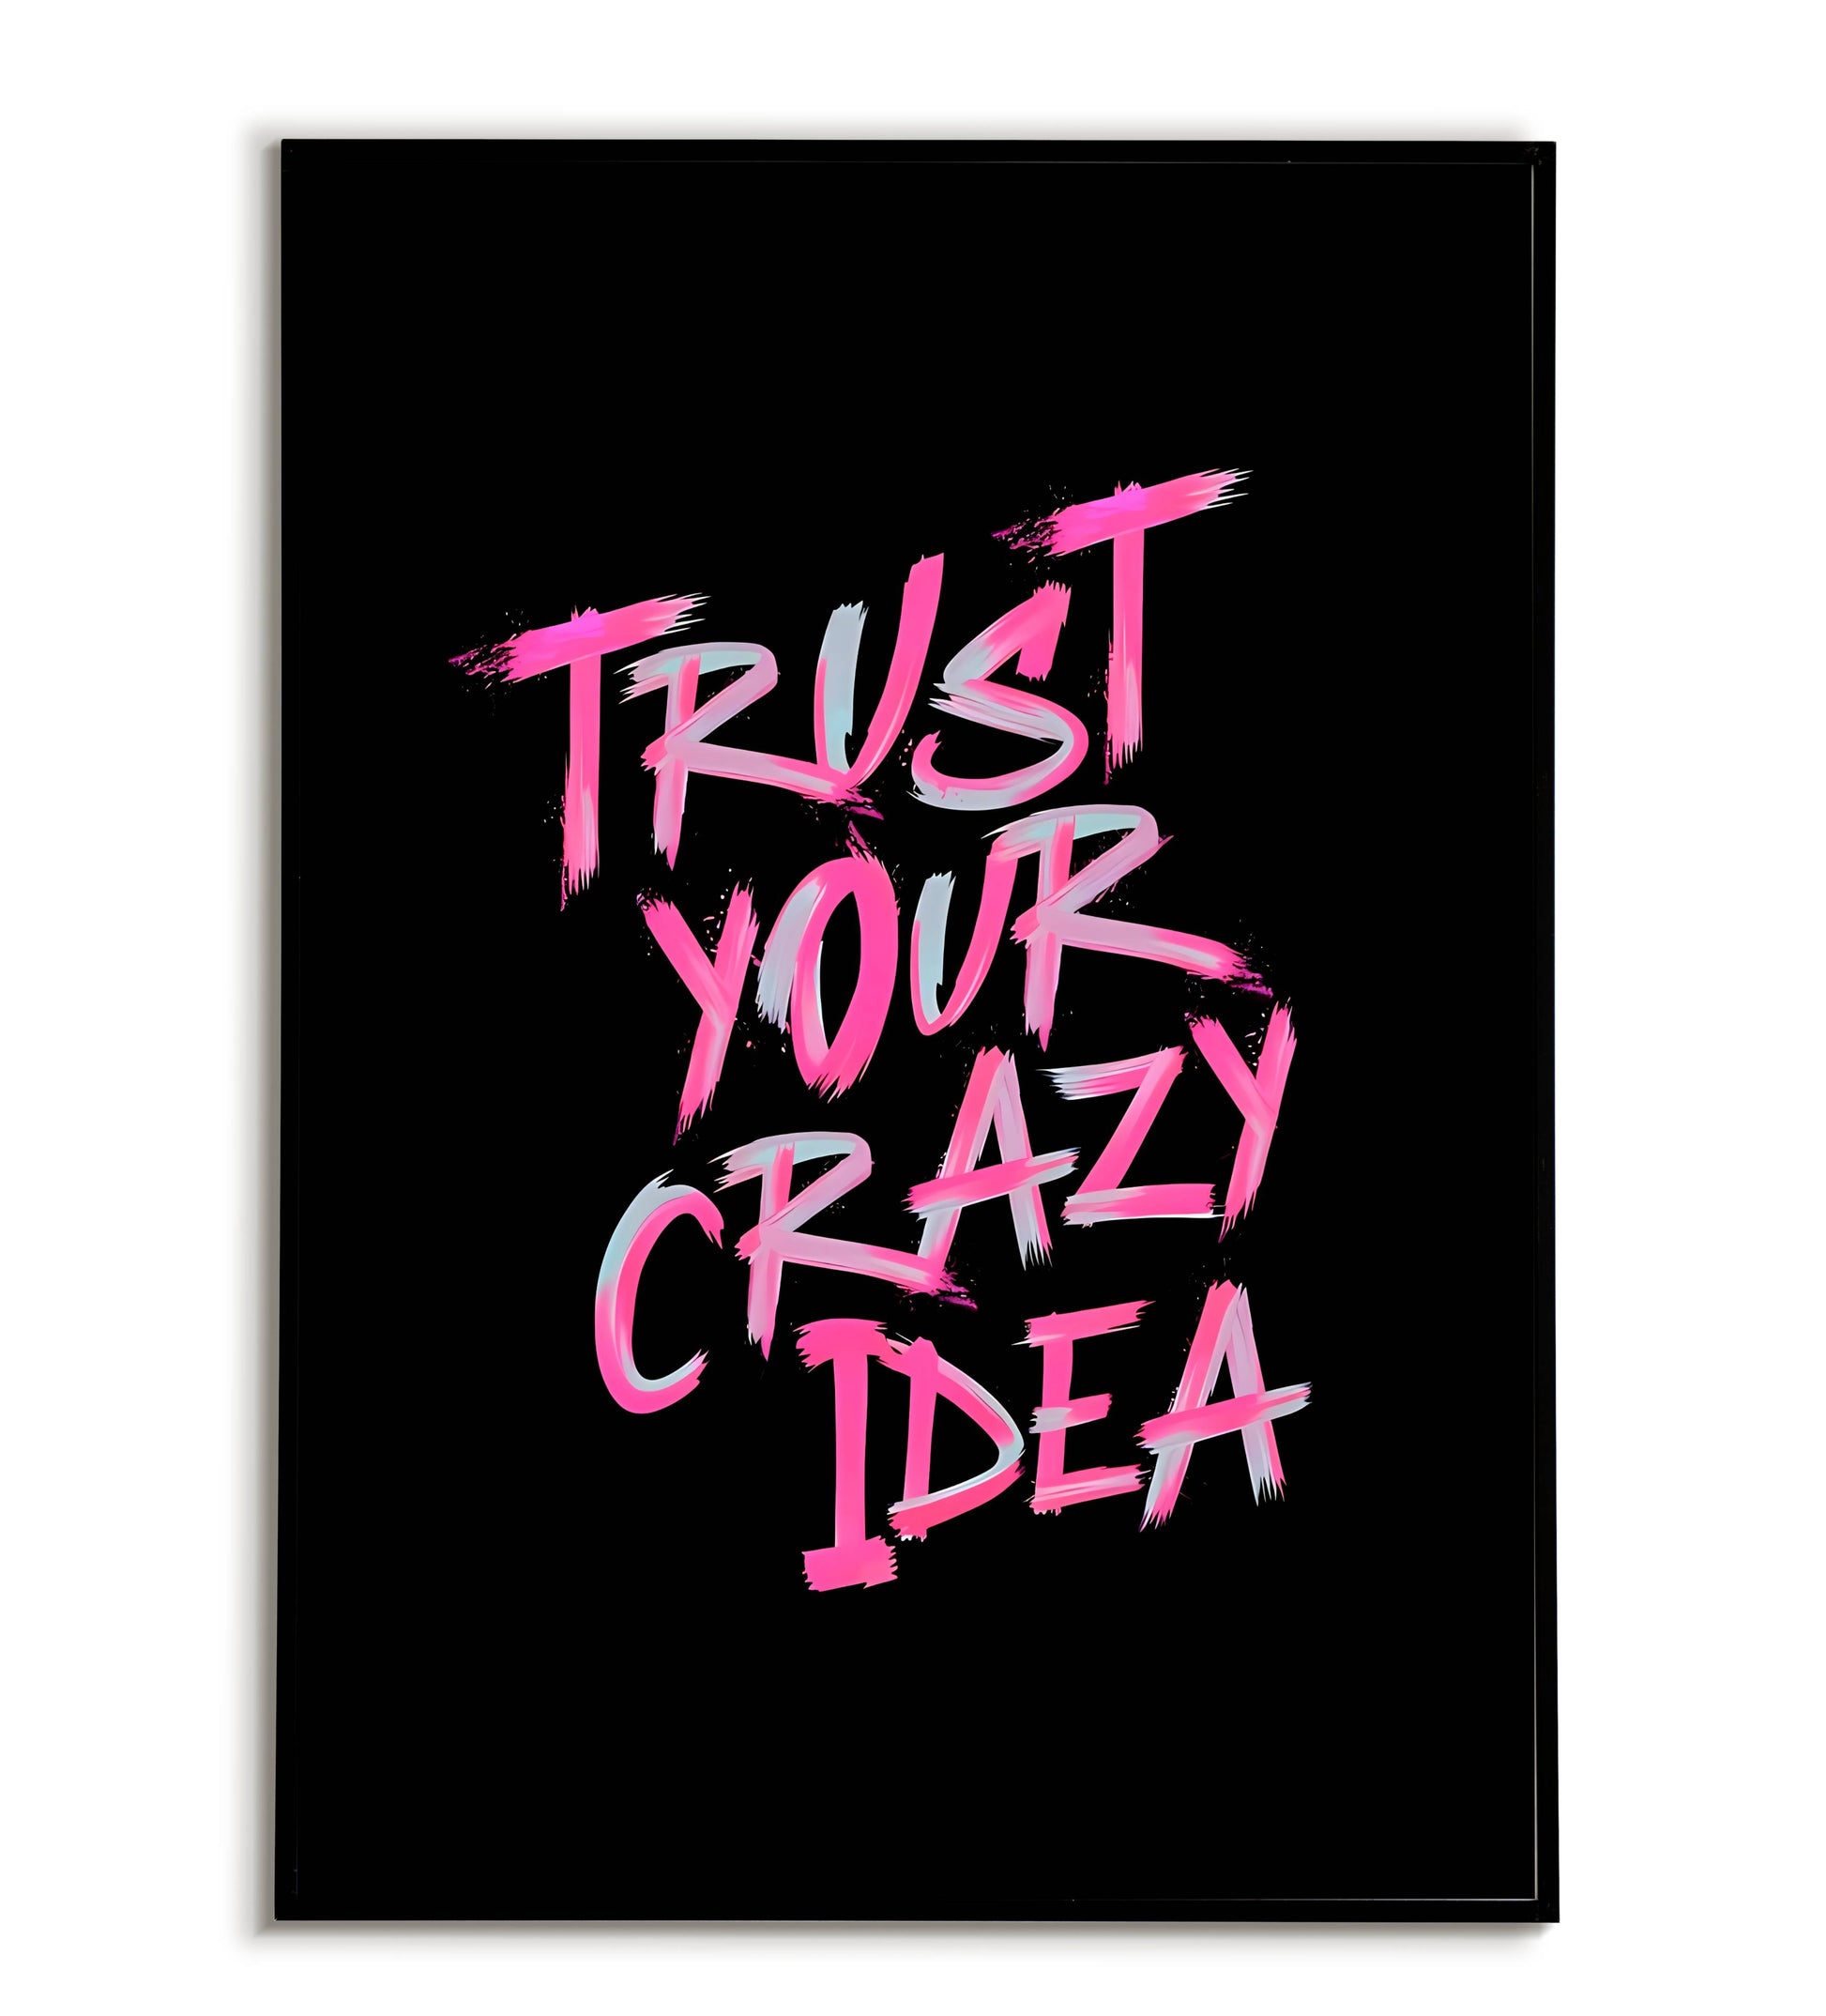 Close-up of Trust Your Crazy Idea poster. Focus on bold lettering and inspiring message.